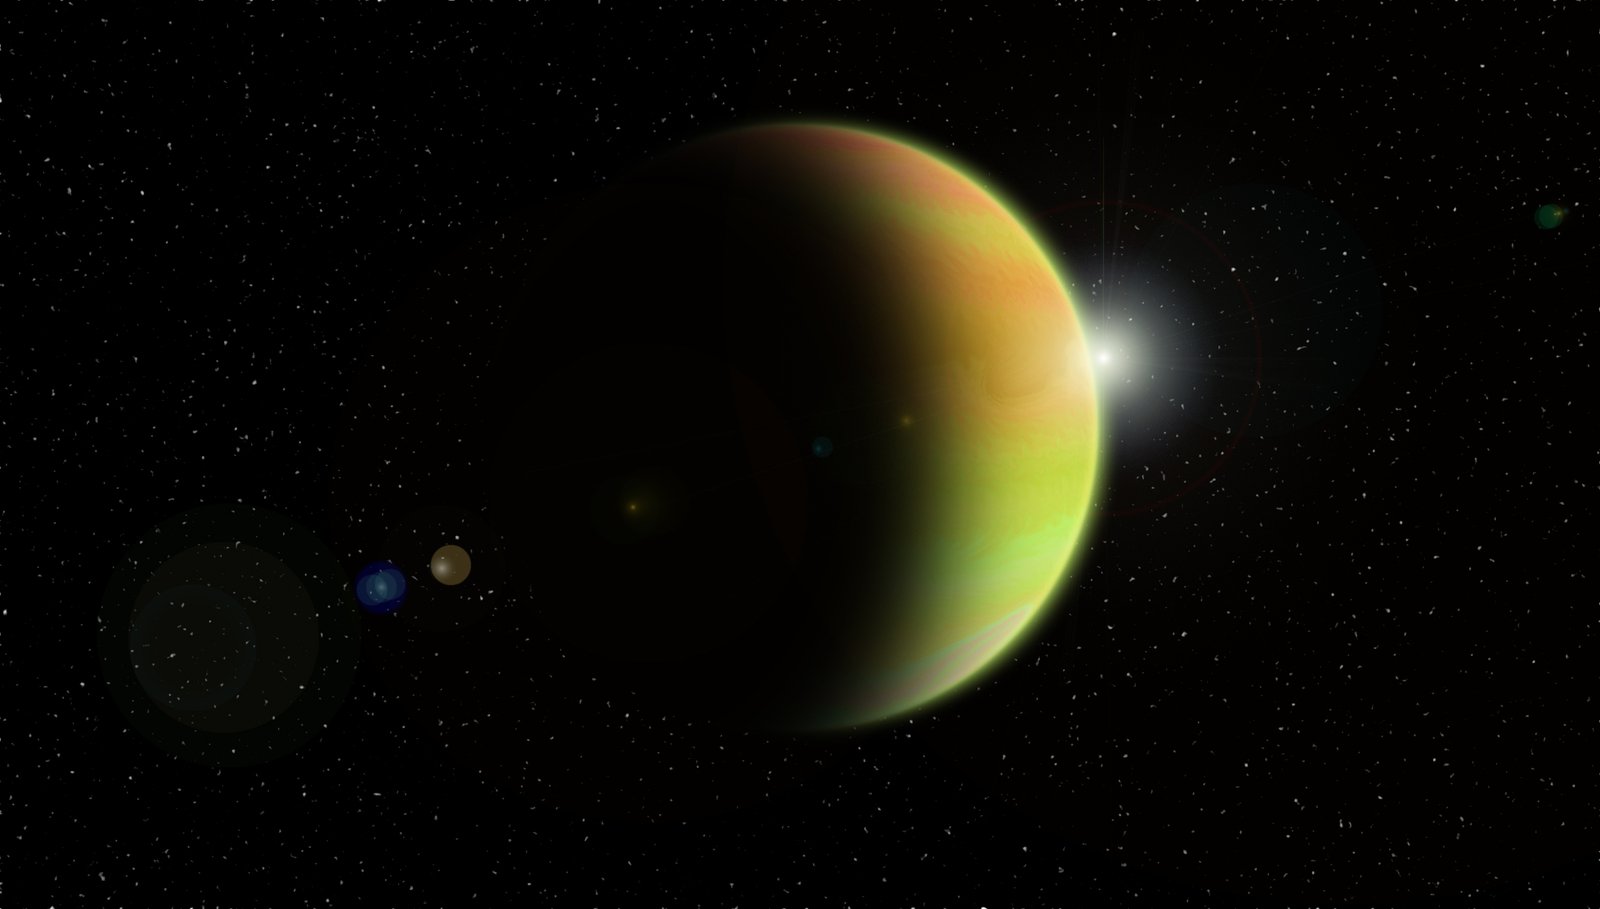 an image of a small planet that appears to be two planets